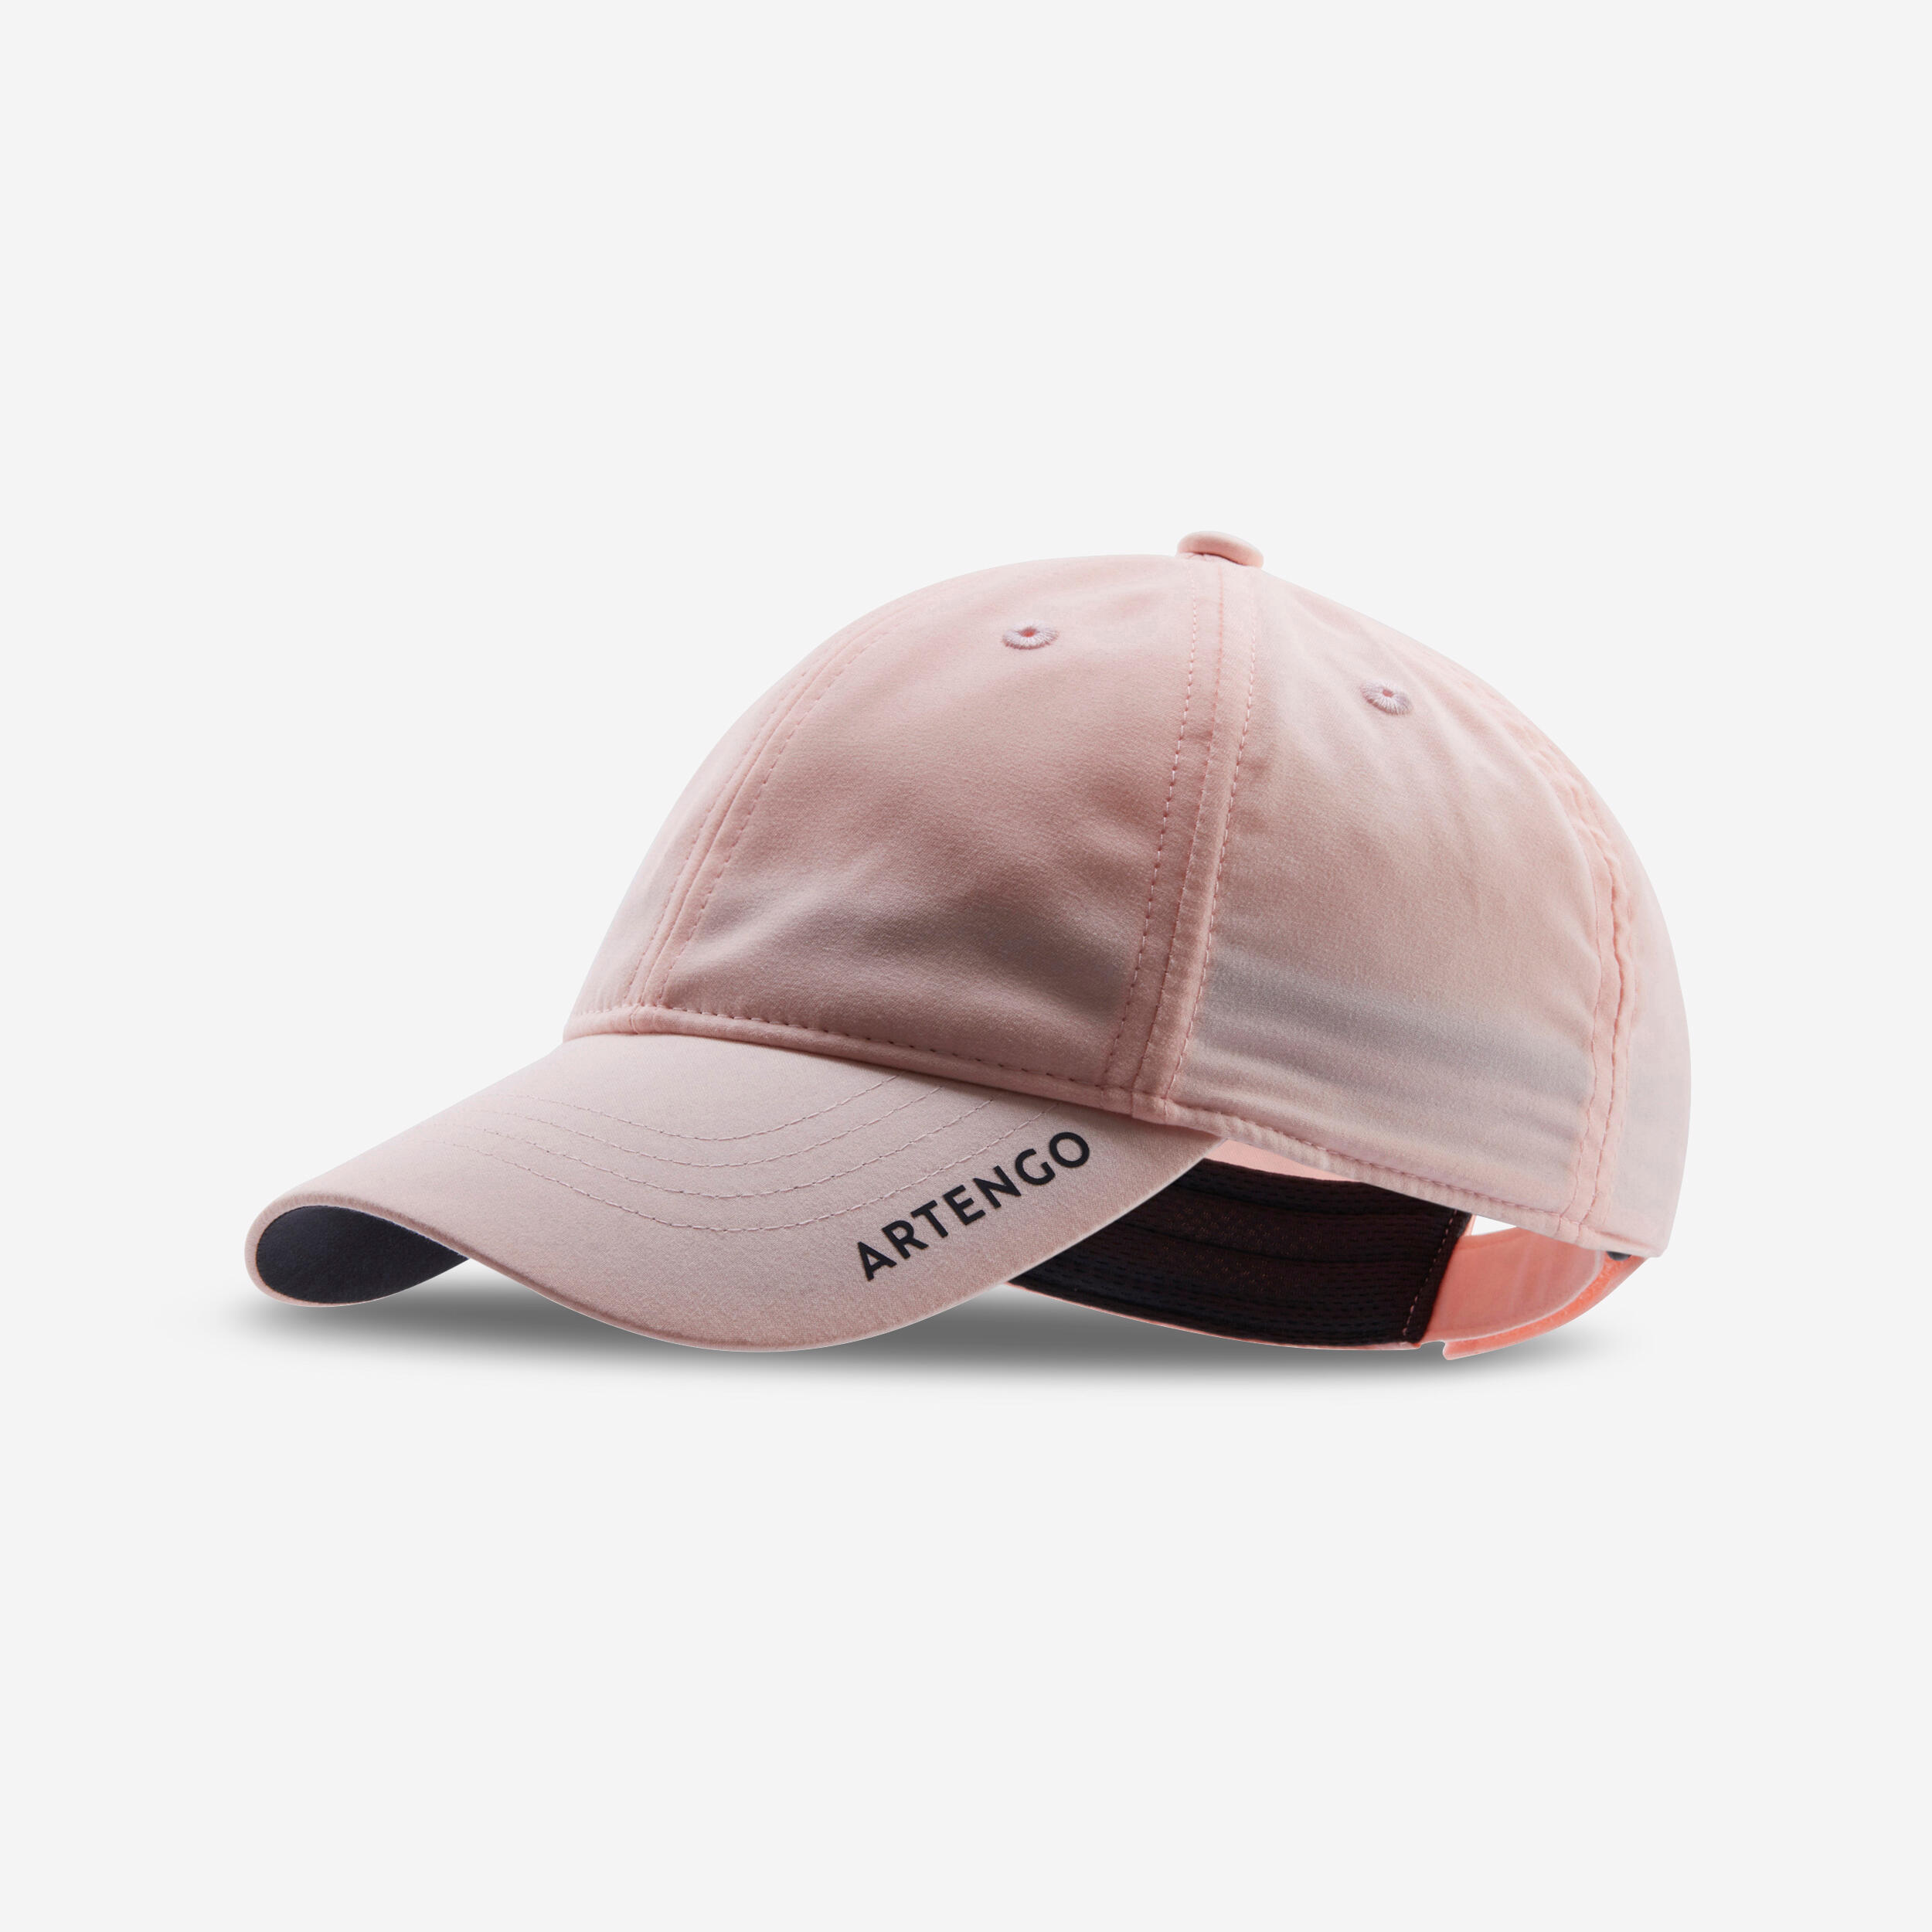 fluo pale pink / carbon grey